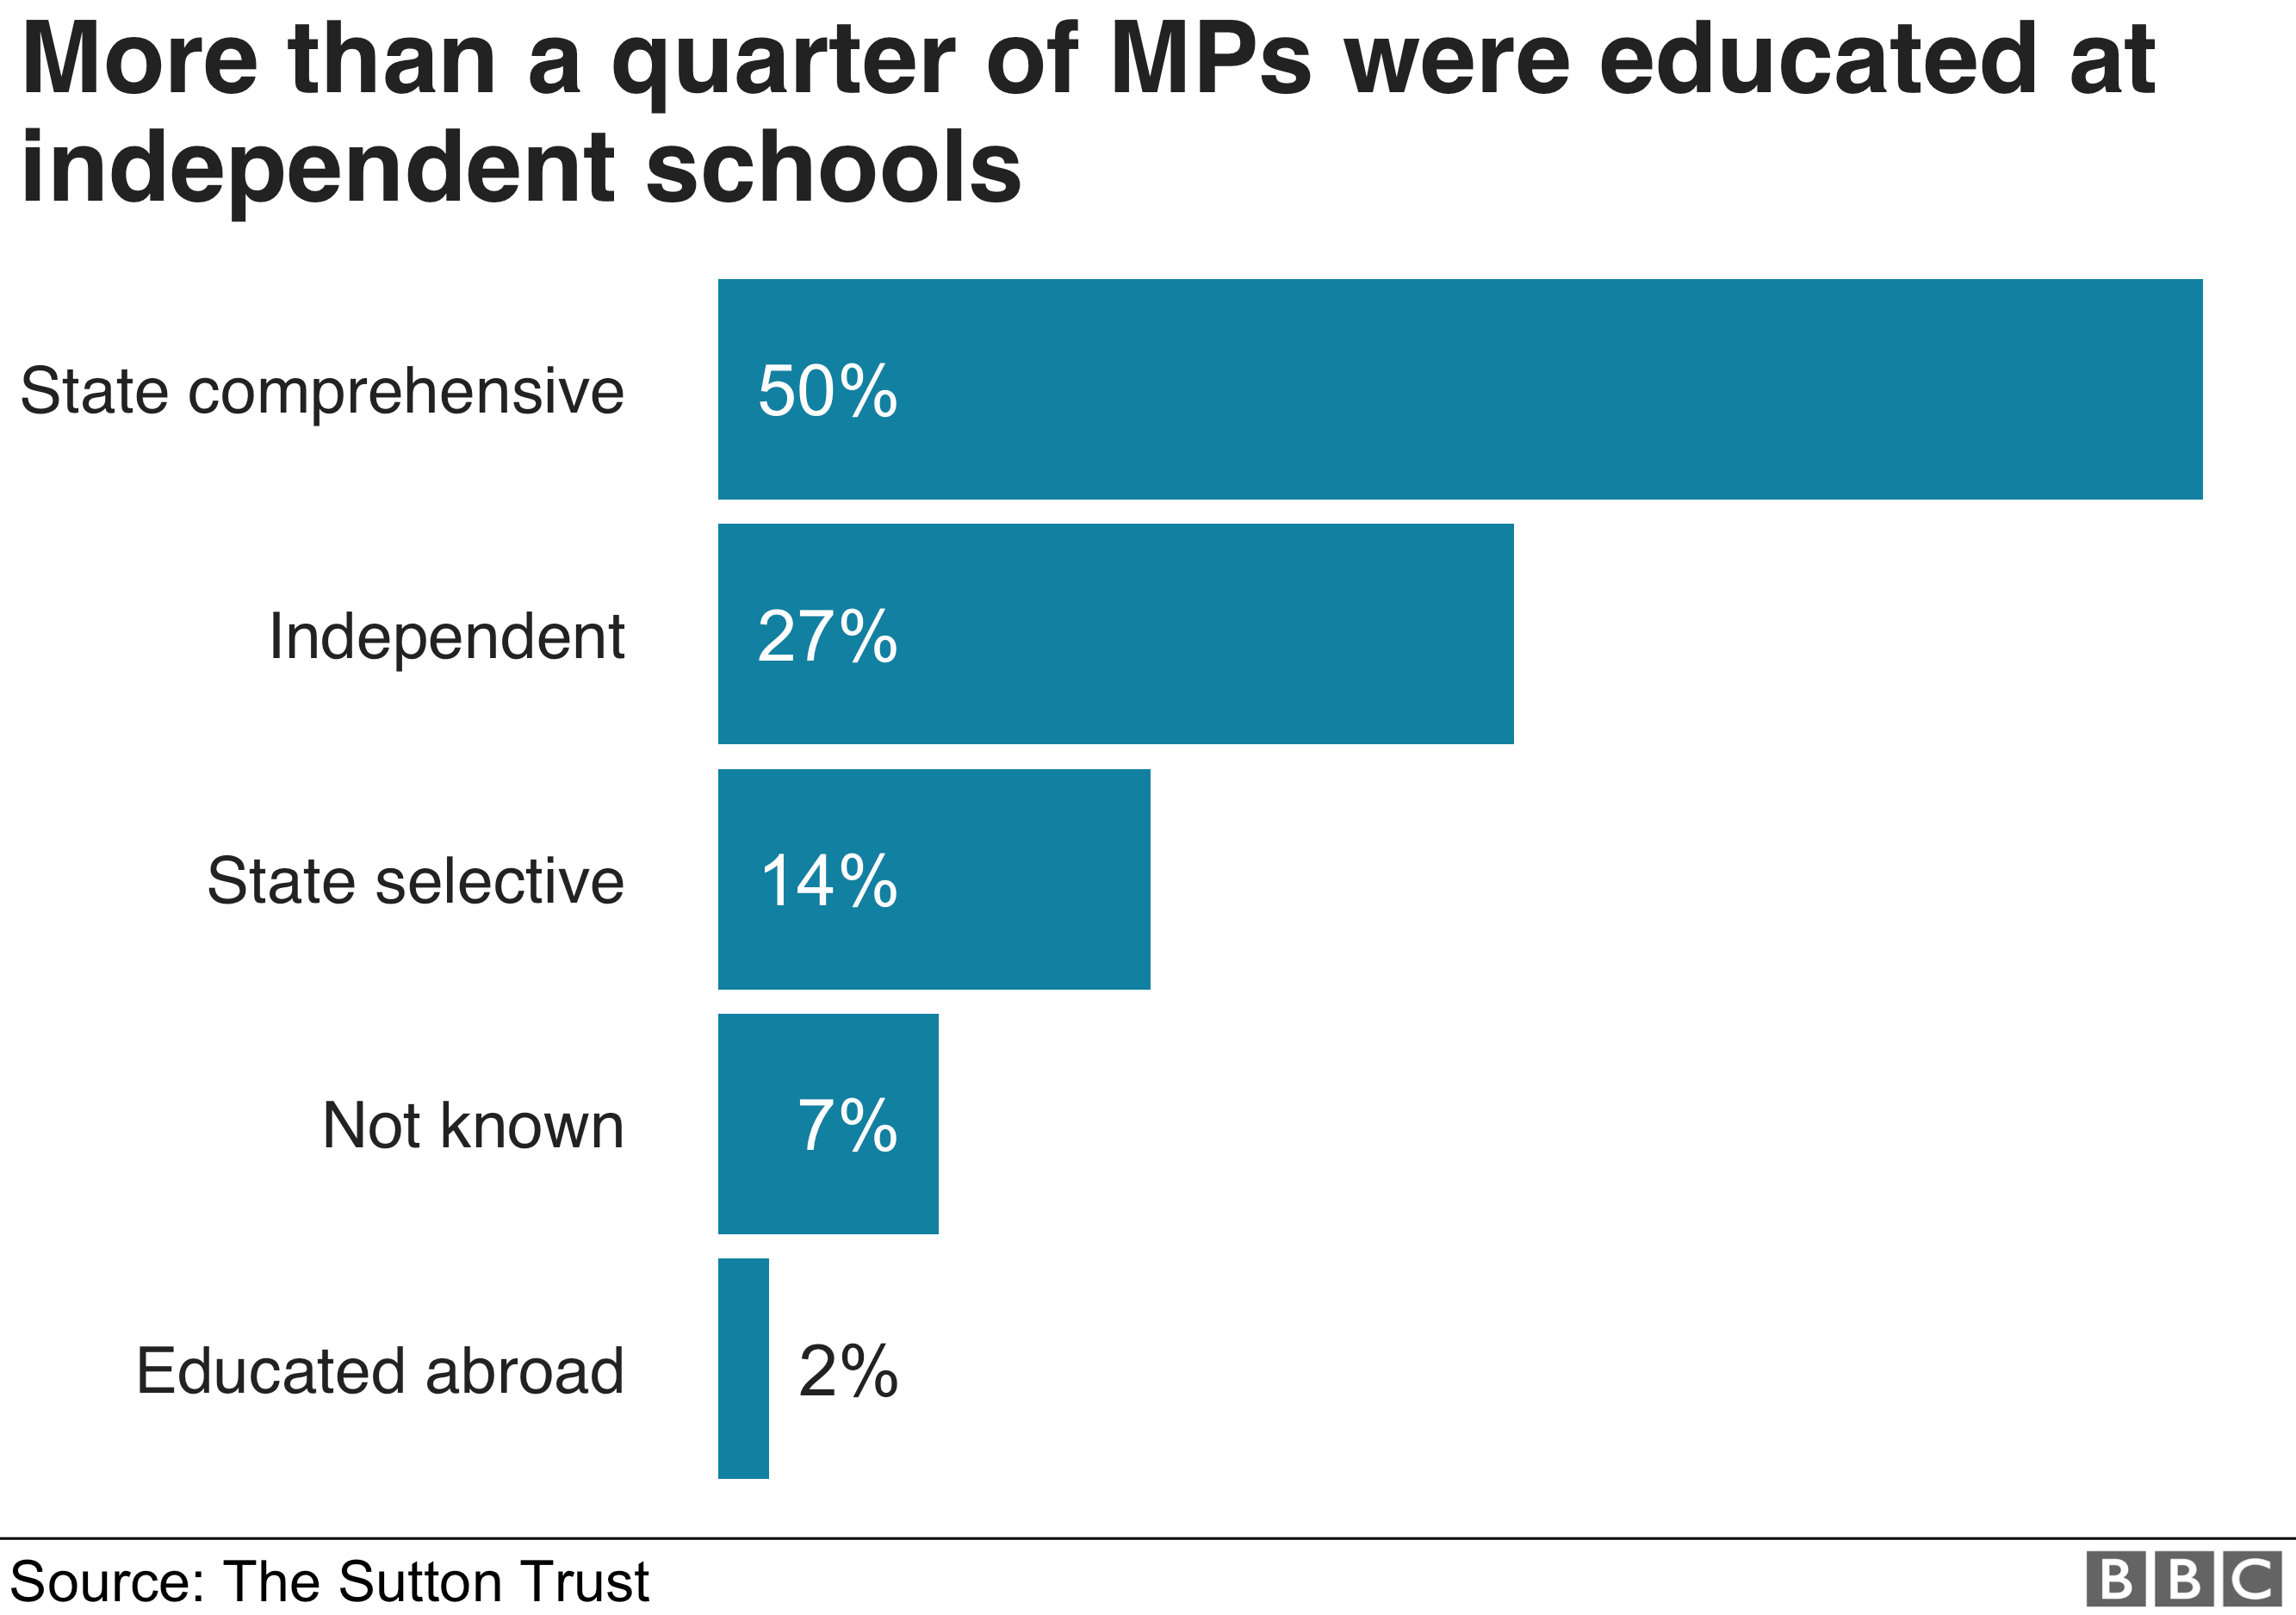 More than a quarter of MPs went to an Independent school